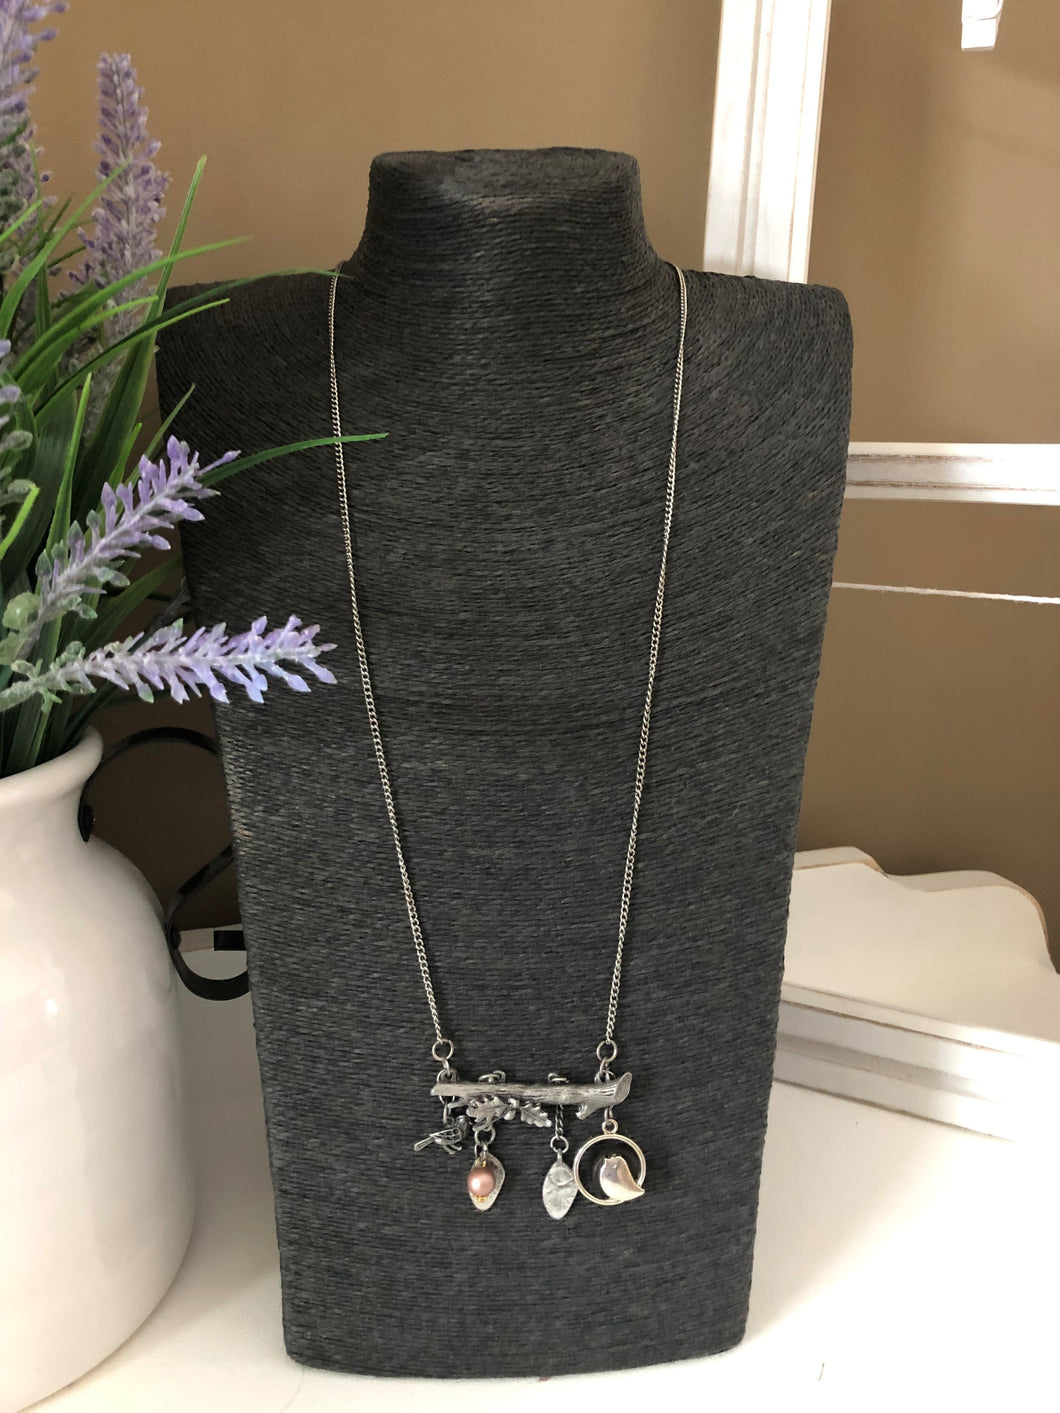 Vintage Inspired Antique Silver Branch W/ Bird & Leaves Necklace